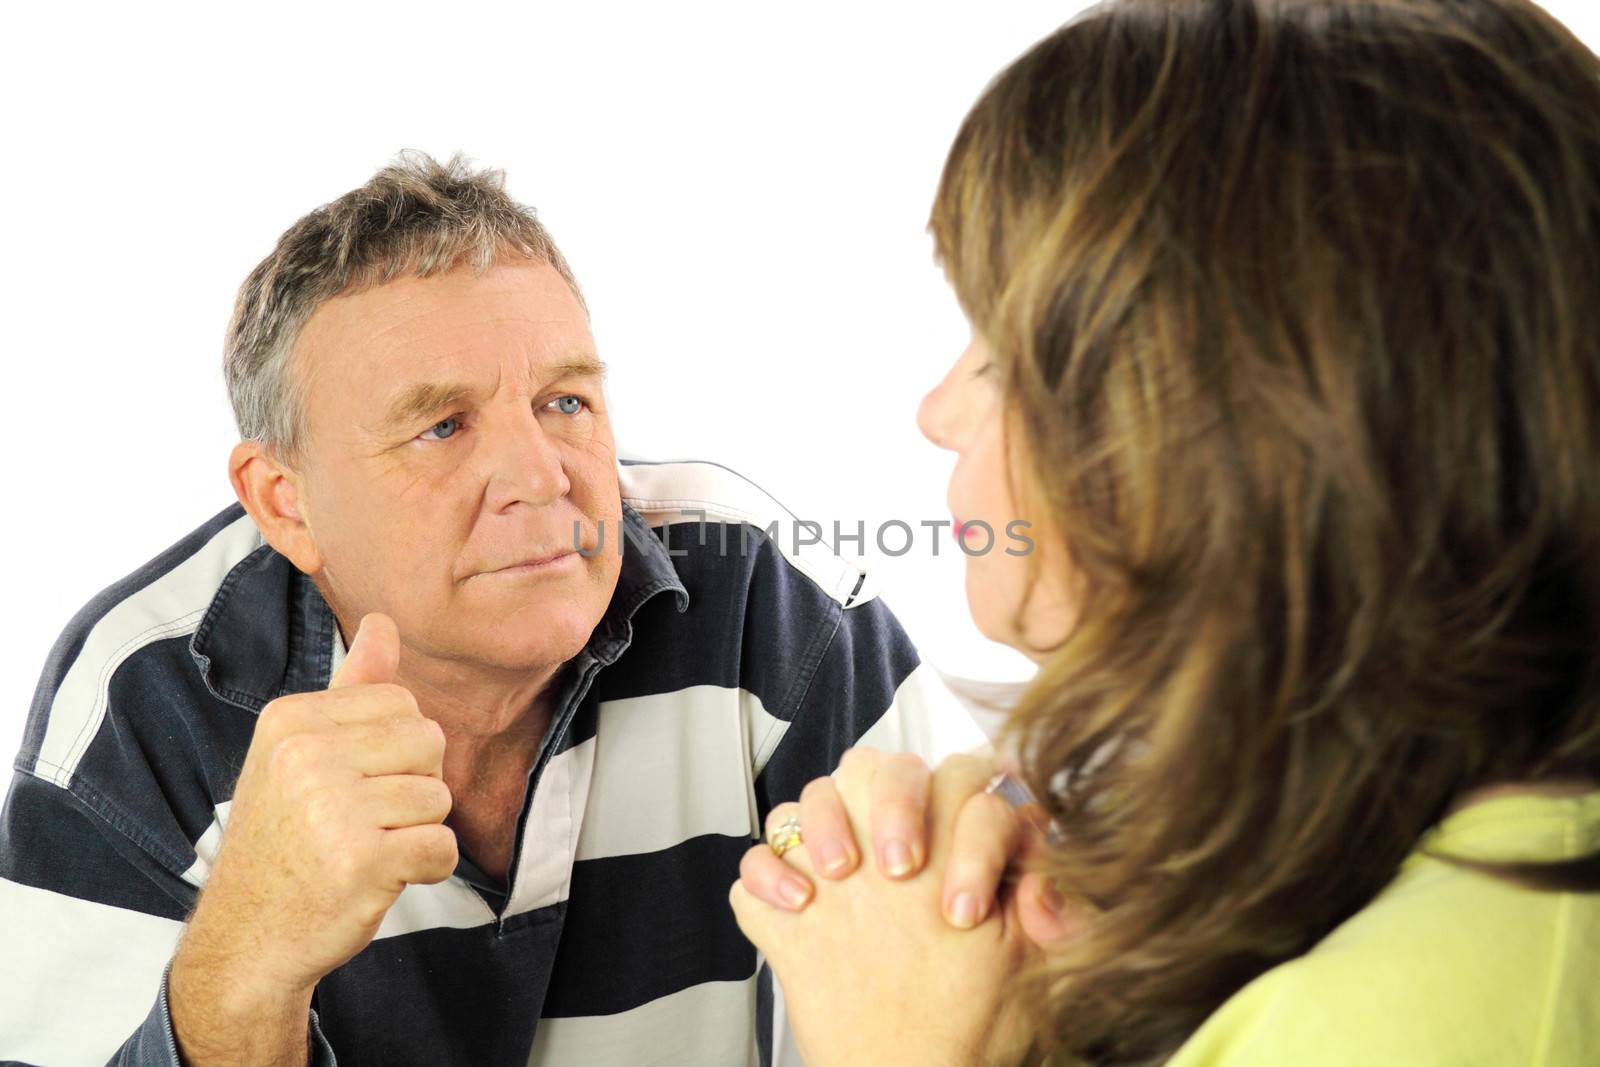 Upset and emotional middle aged couple after an argument.